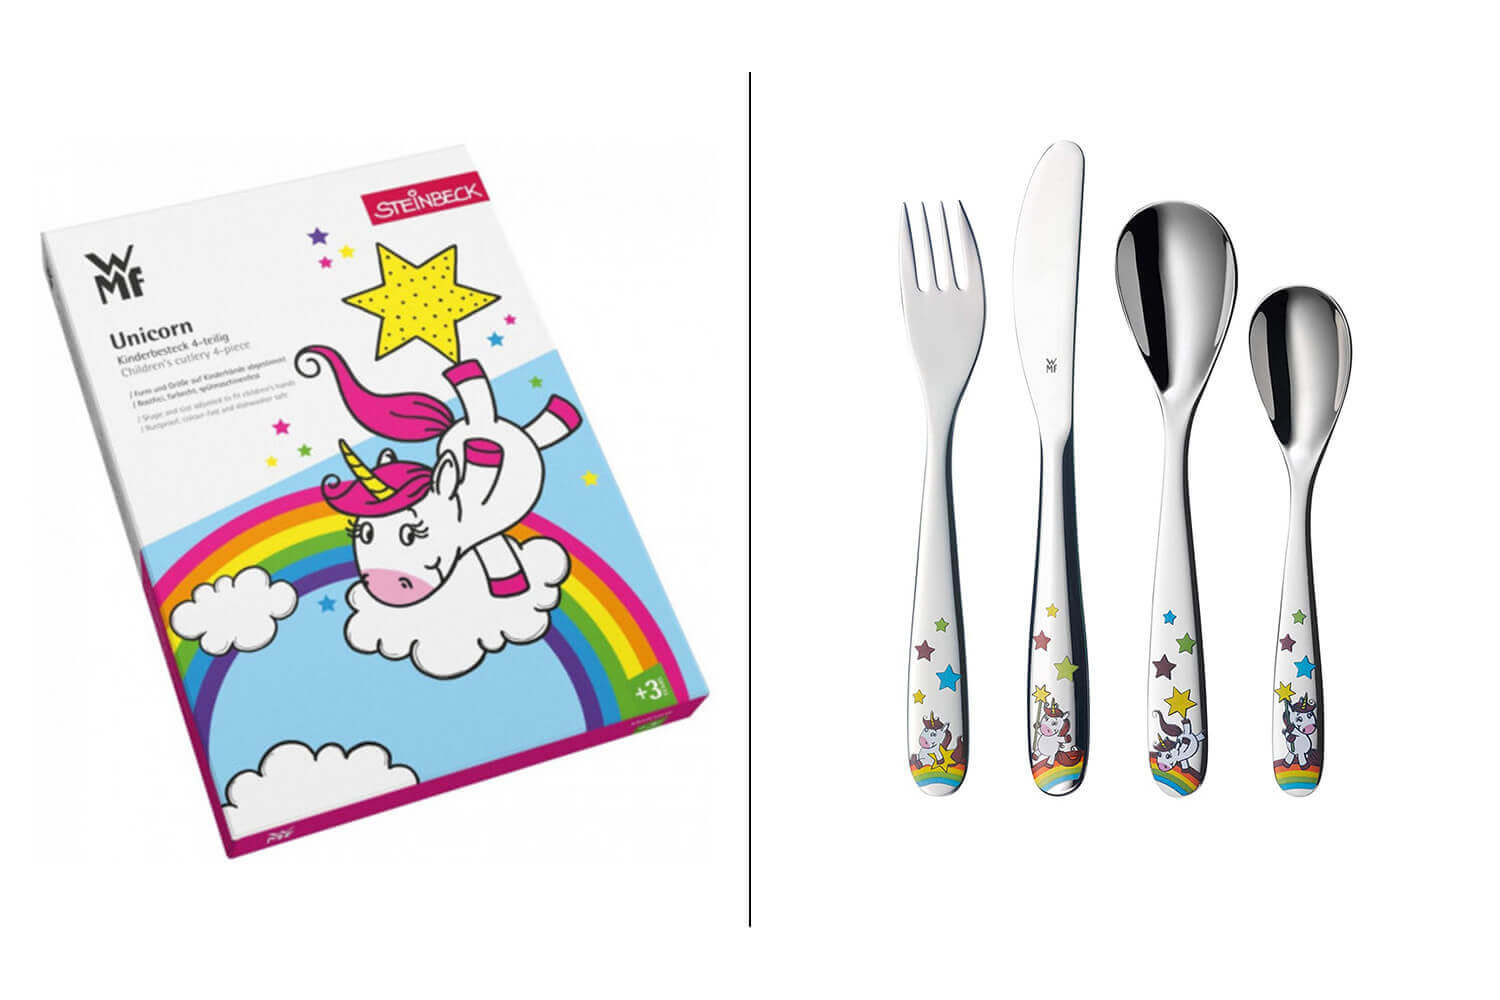 Couverts pour enfant inox Zwilling Teddy